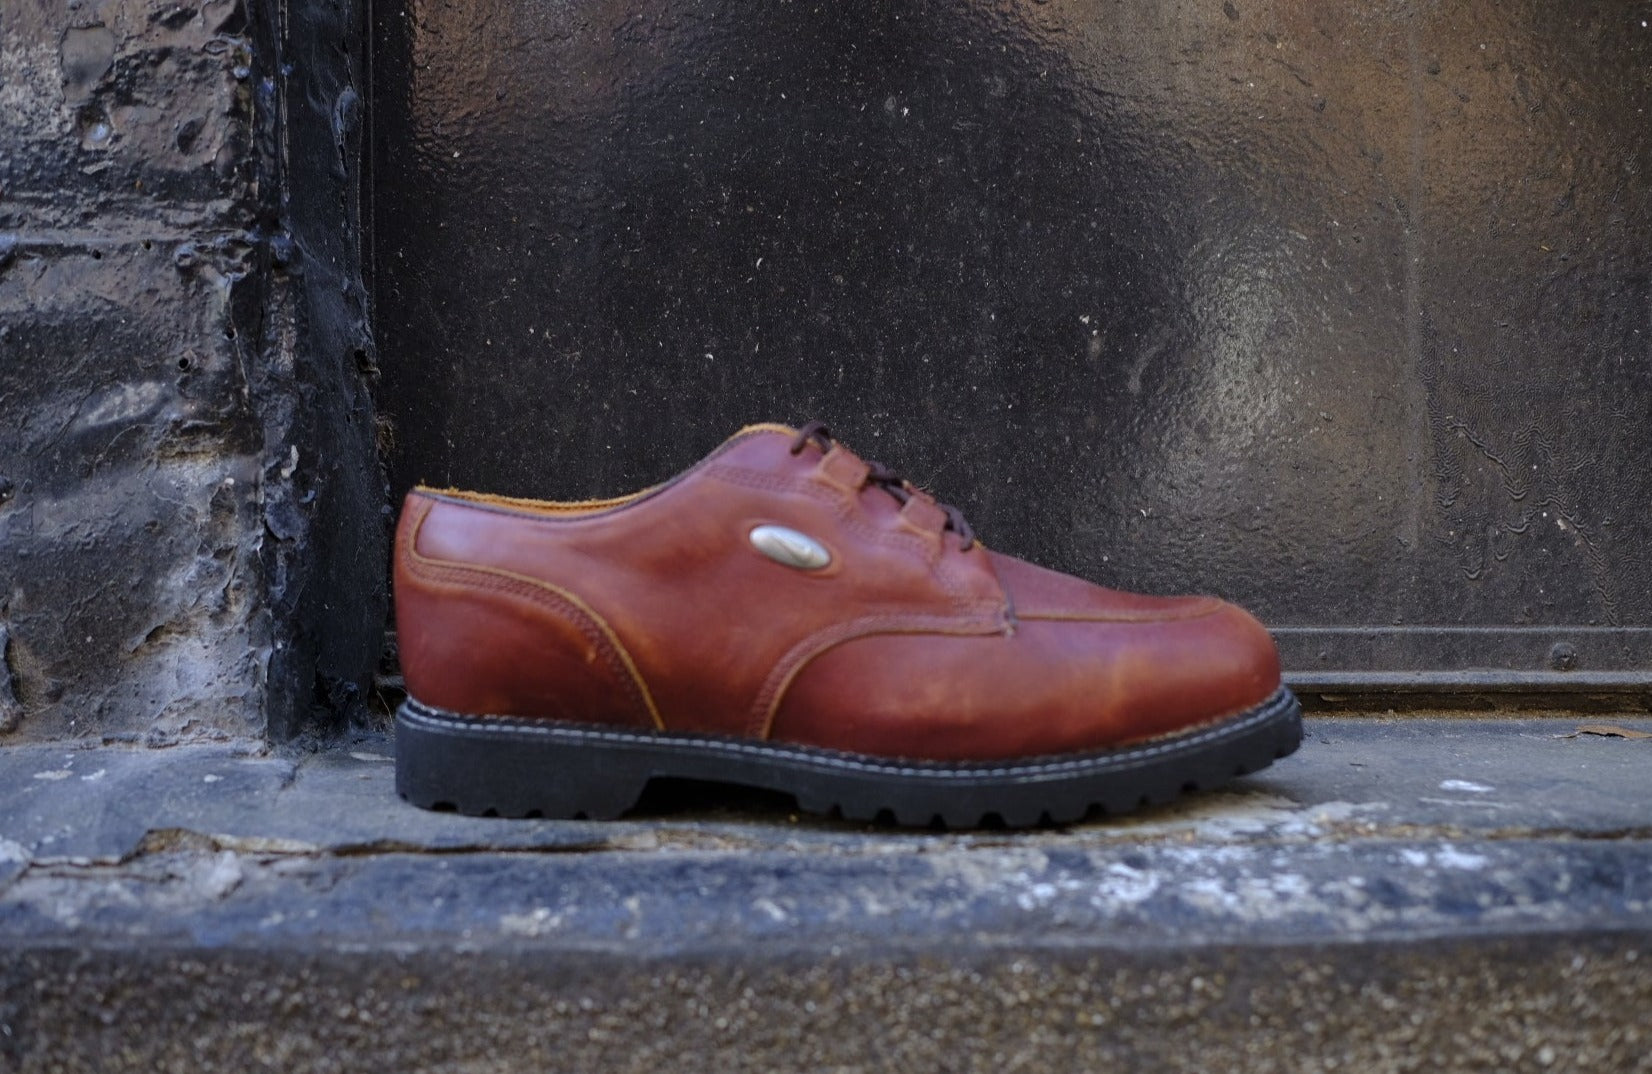 reconstructed 1997 nike golf moc toe boot - m us 8.5